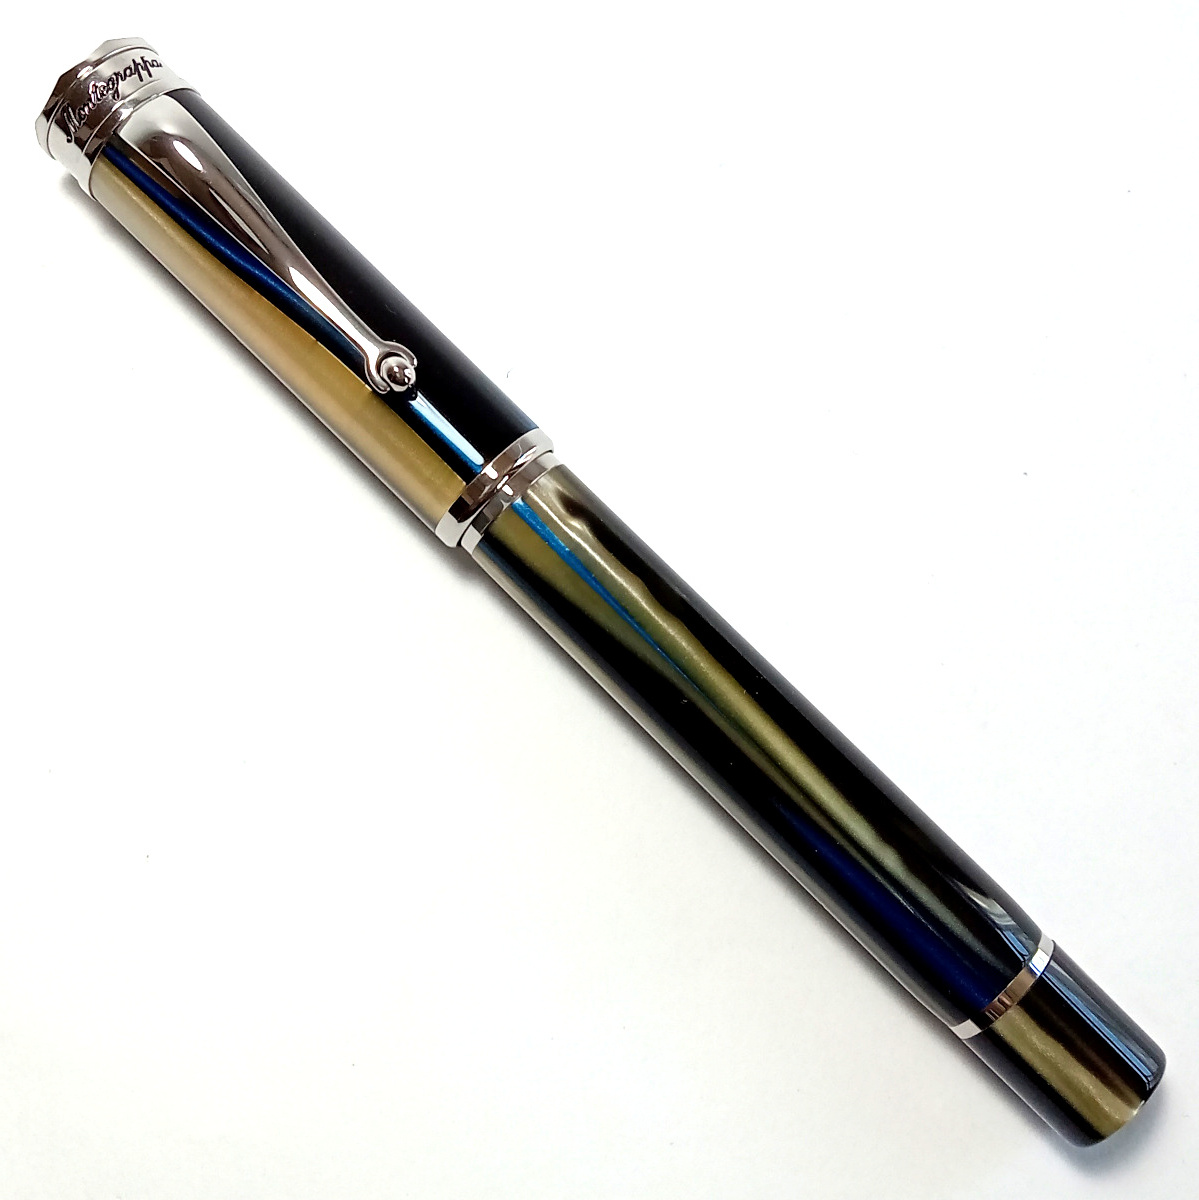 [mgf2] new goods Montegrappa Montegrappa fountain pen du car re Murano ( blur no) mare / sea blue / blue both for type F small character 